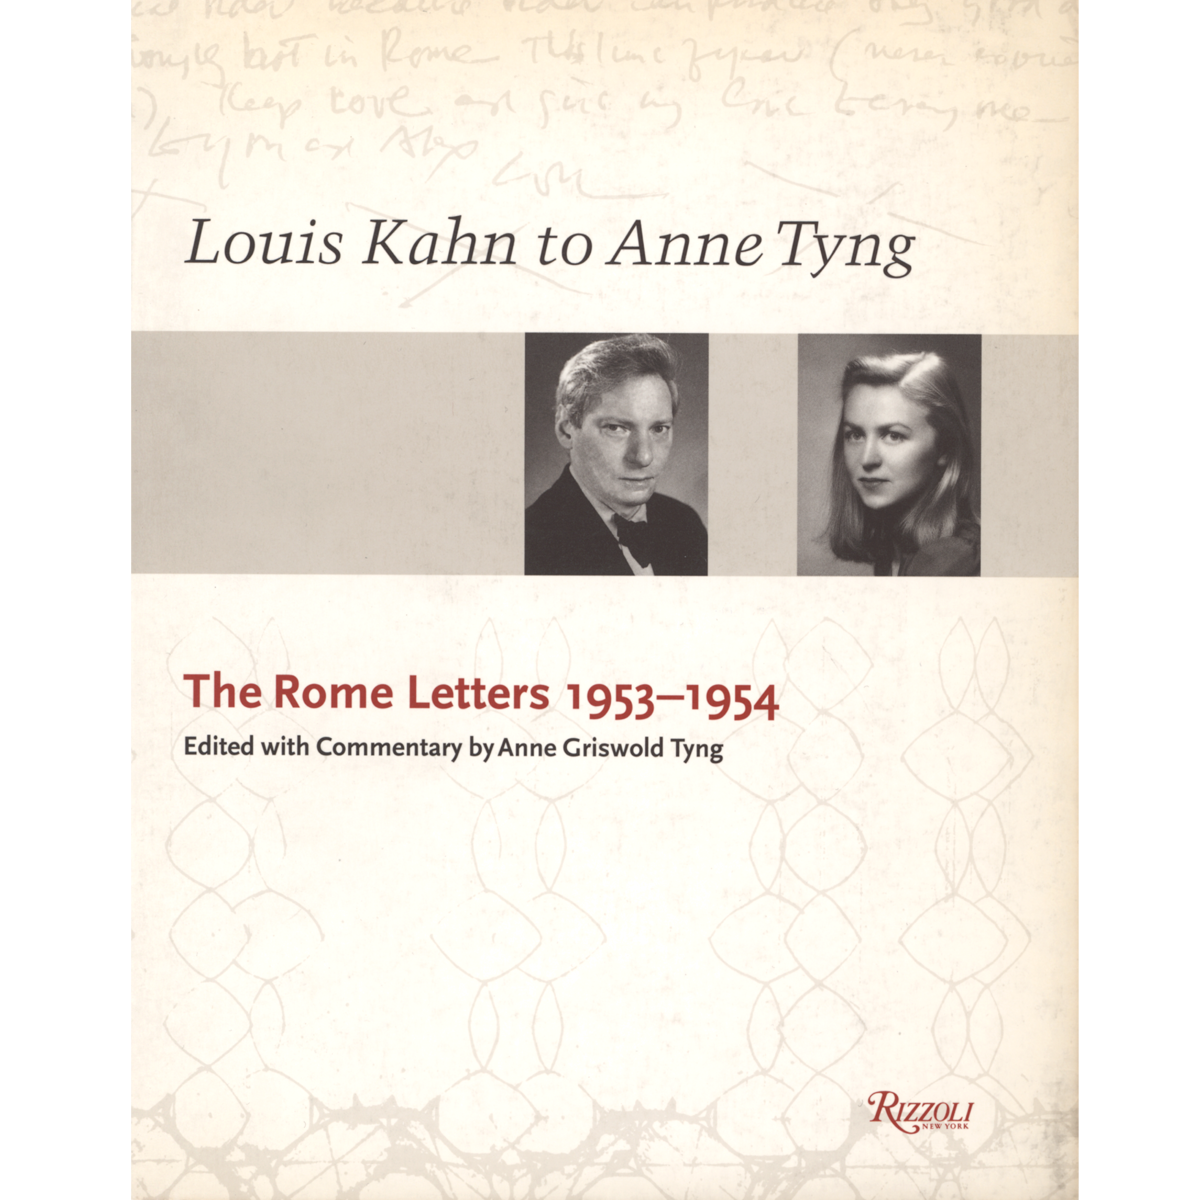 Louis Kahn to Anne Tyng: The Rome Letters 1953-1954